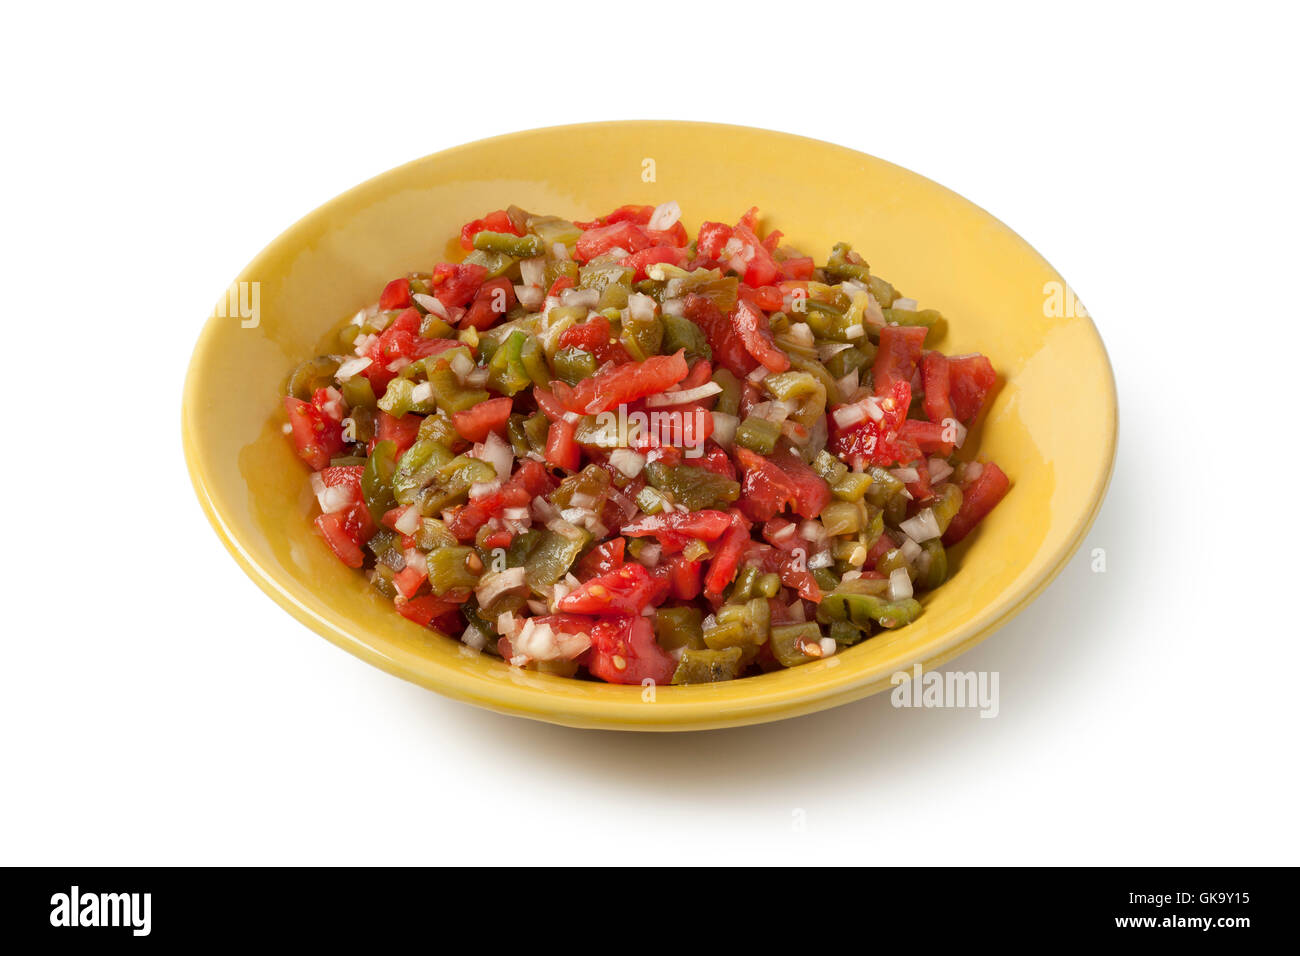 Traditional Moroccan dish with bell pepper salad on white background Stock Photo